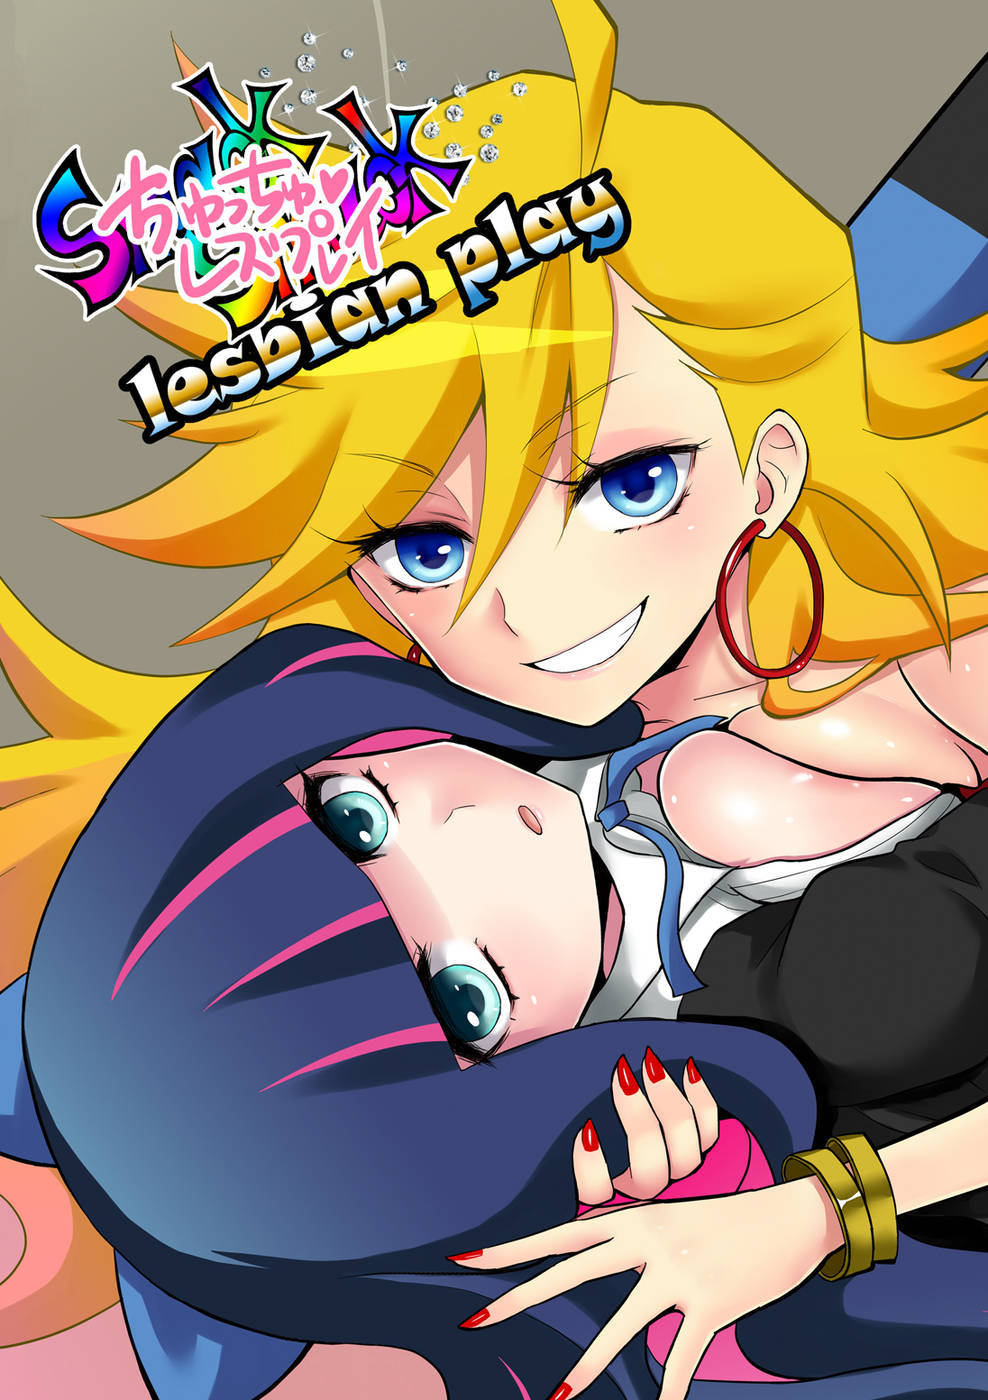 Smack Smack Lesbian Play by Random A Panty &amp; Stocking with GarterbeltCensoredContains: